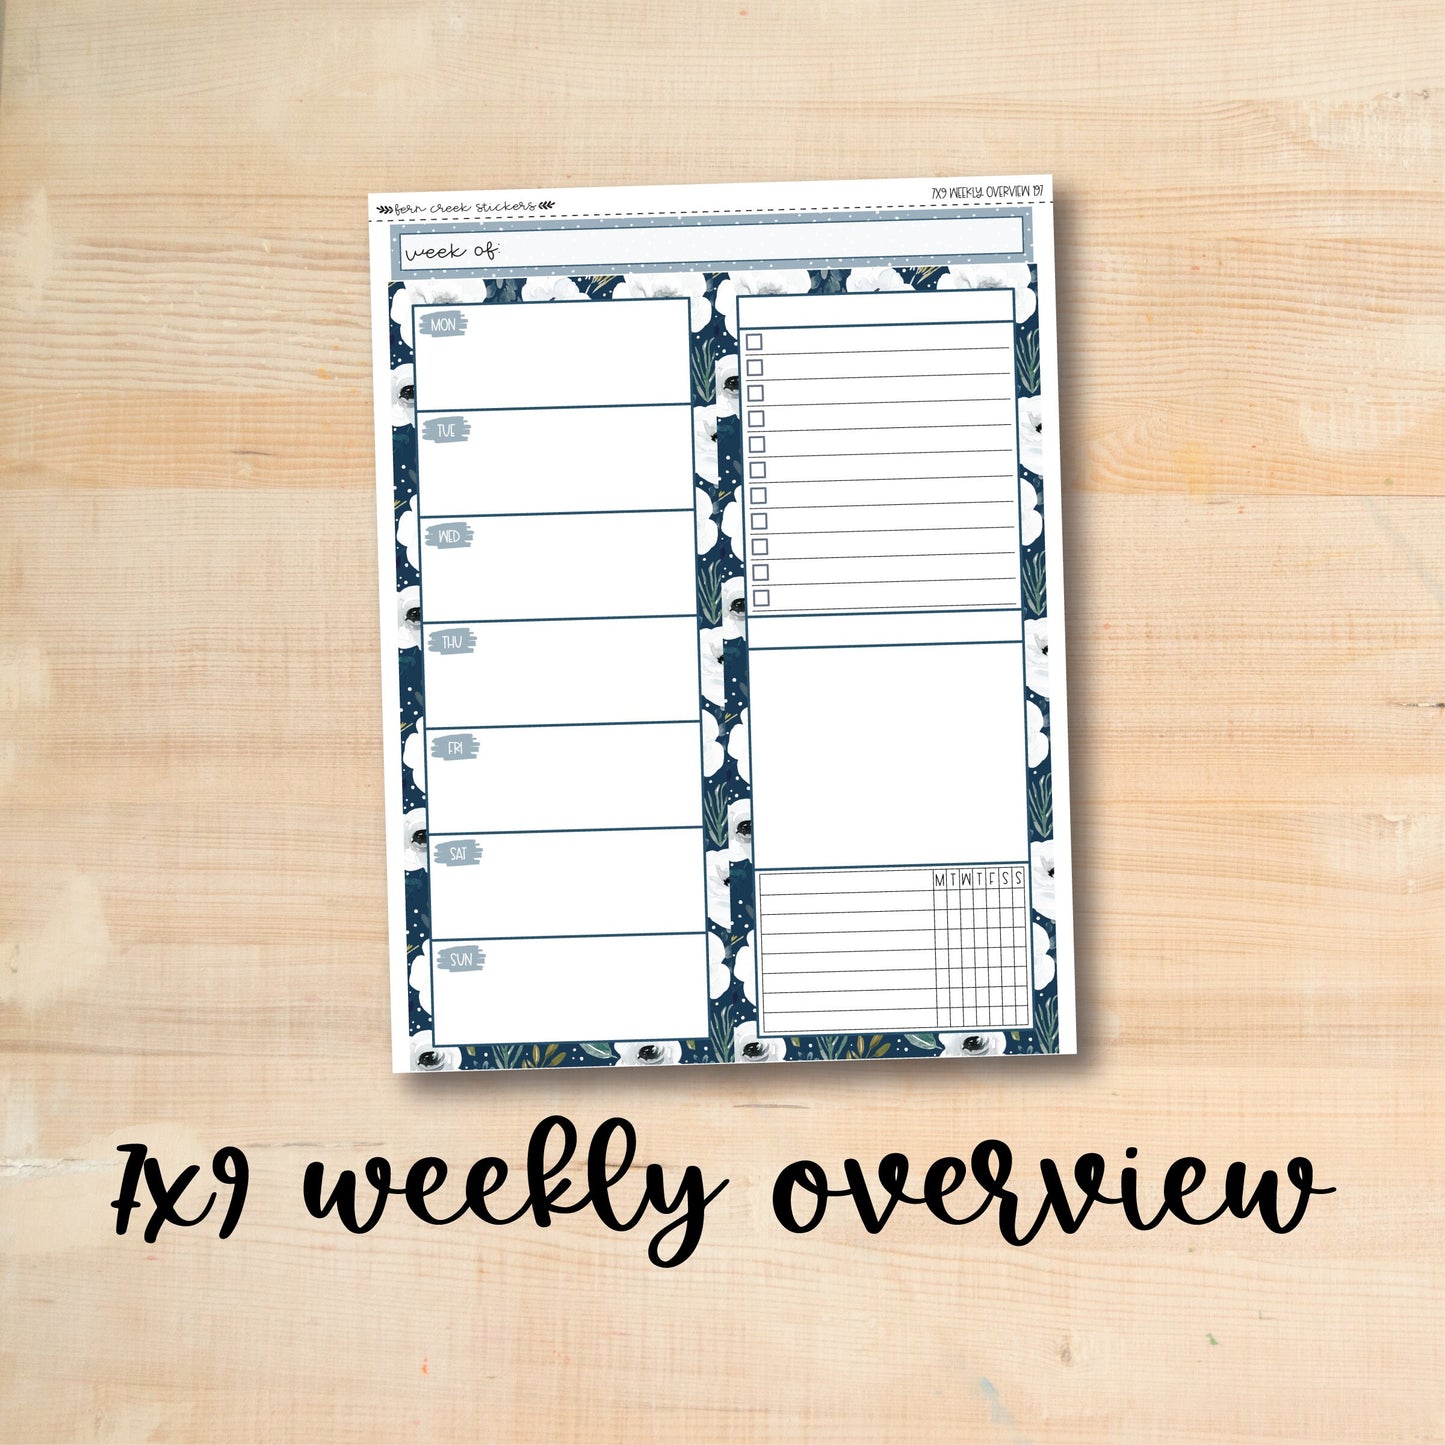 7x9-WO 197 || WINTER FARMHOUSE 7x9 Daily Duo Erin Condren Weekly Overview